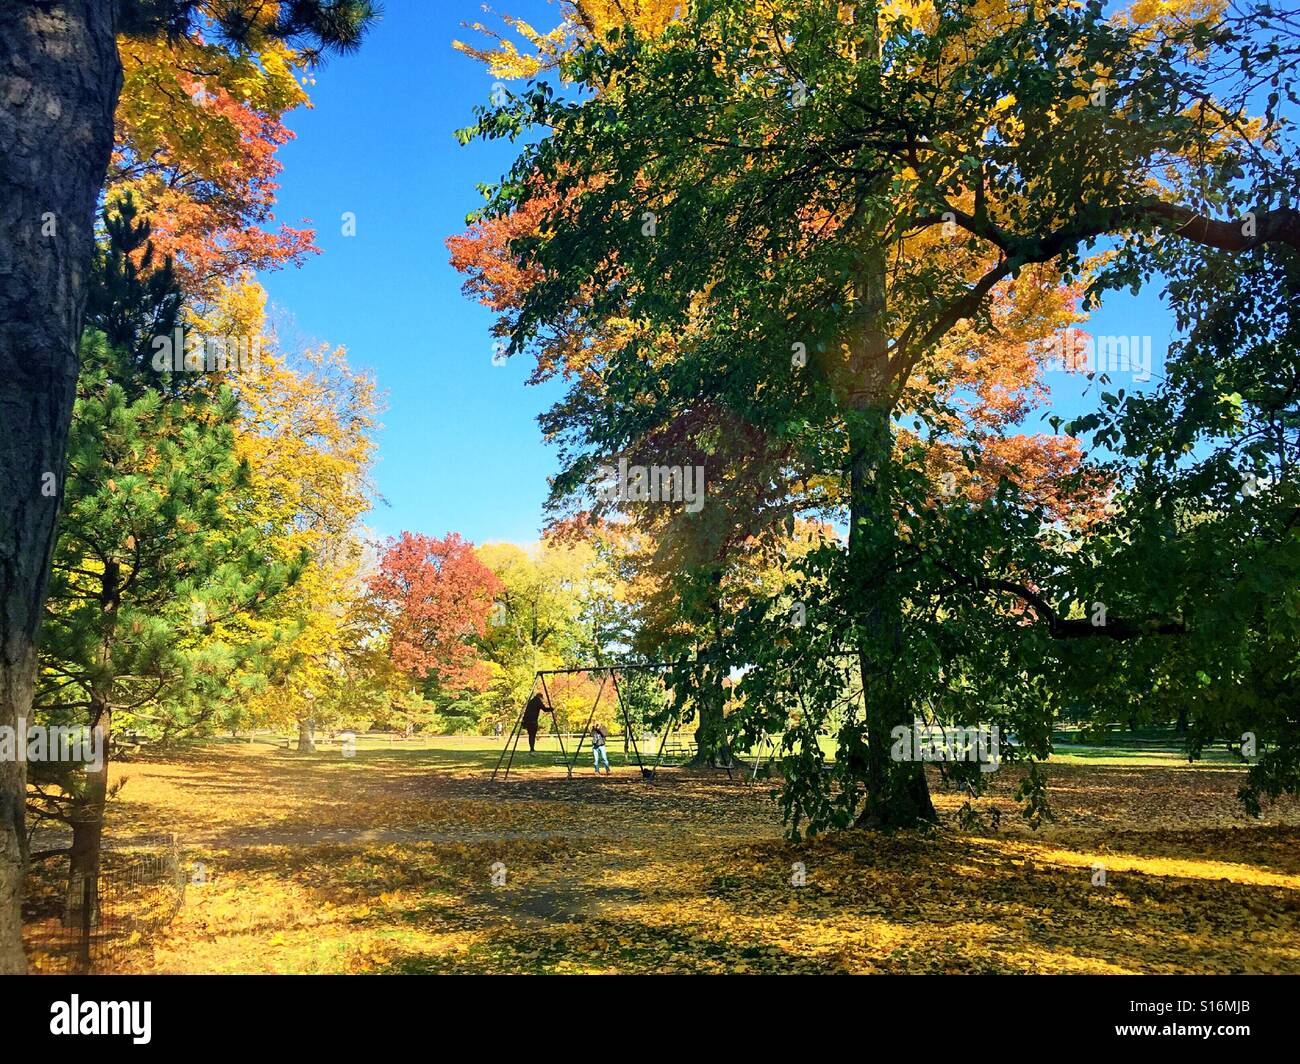 Fall foliage in Central Park, NYC Stock Photo